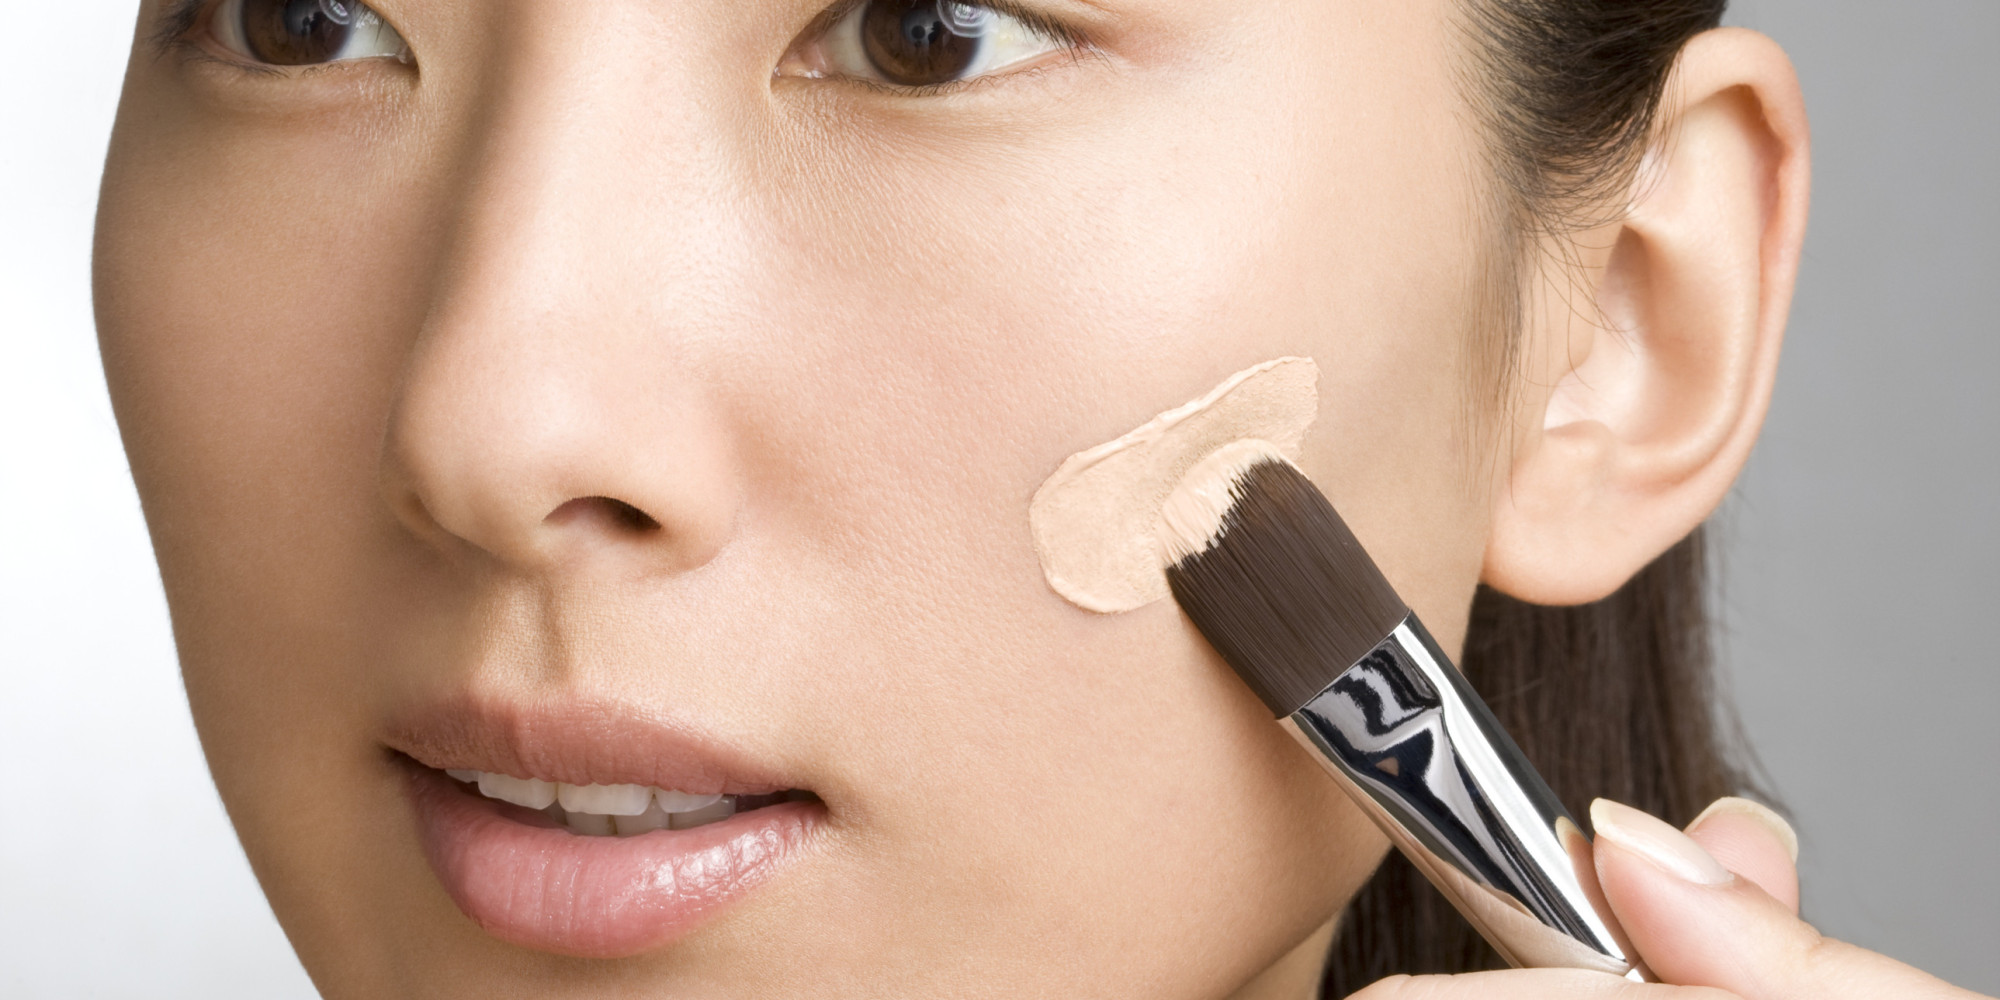 What Are The 3 Most Common Ways Women Apply Foundation Incorrectly